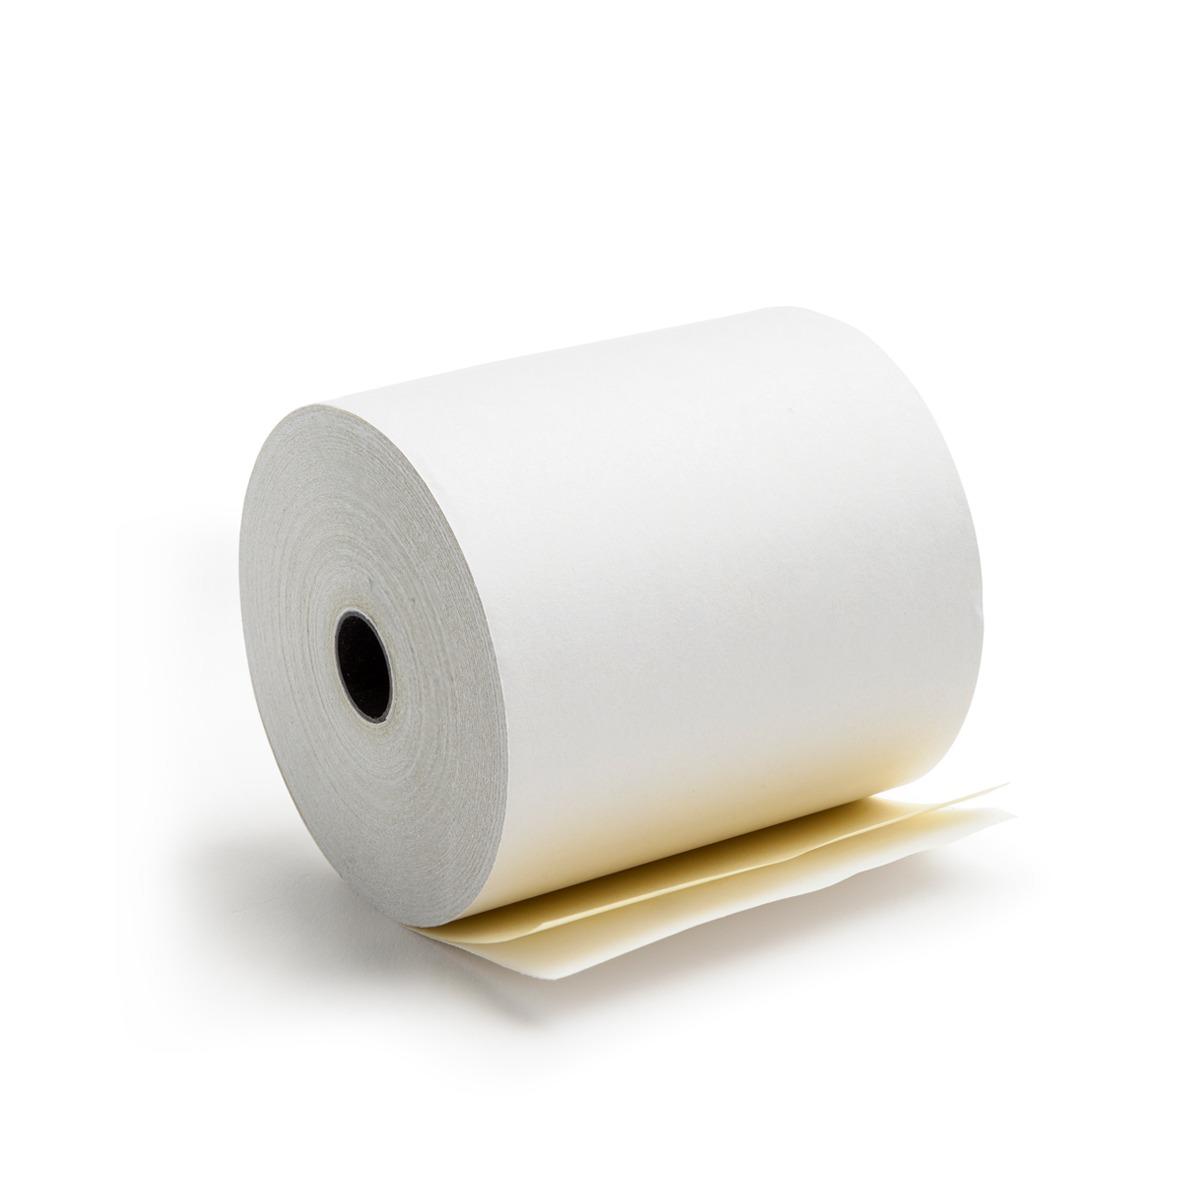 ROLLO PAPEL P/MAQ 44 MM X 30 MTS X 10 QUIMICO MAUGER